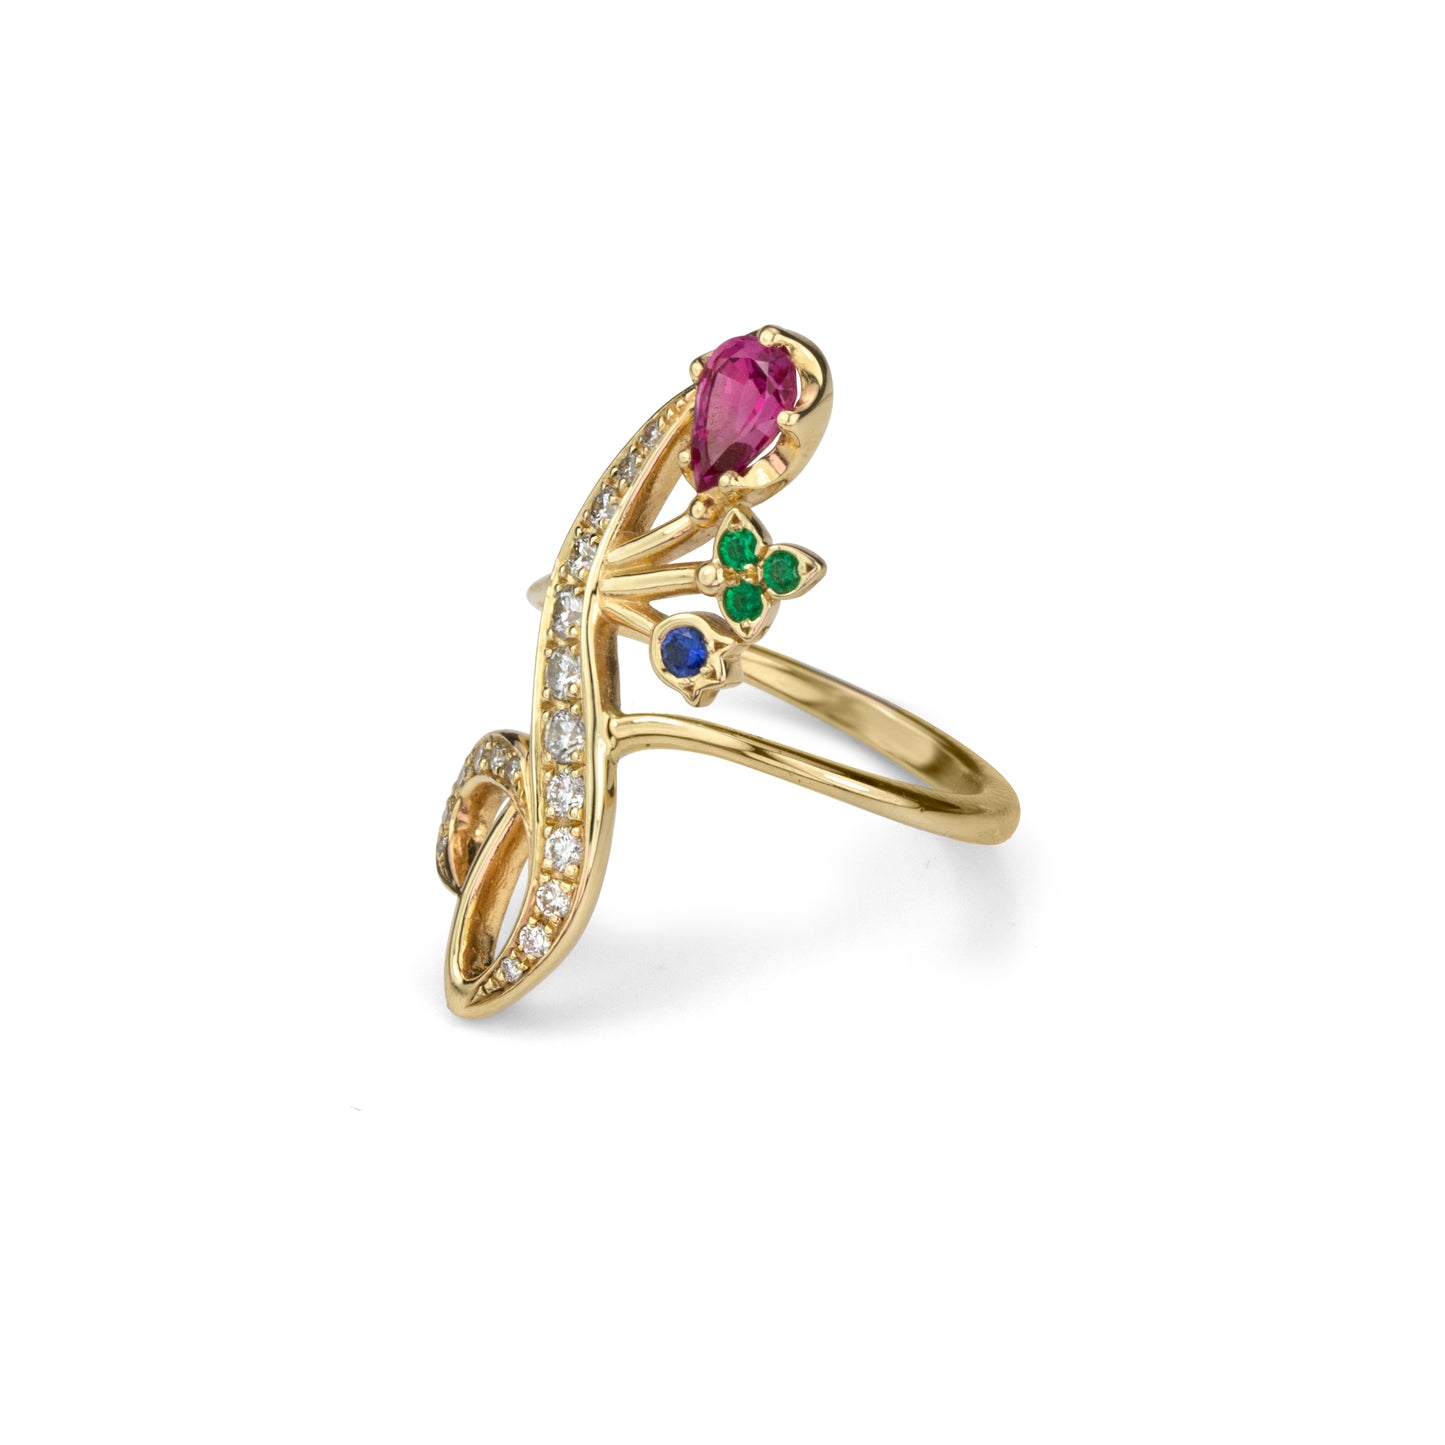 Load image into Gallery viewer, Fancy yellow gold and gemstone giardinetti style  ring with curving diamond set leaf design and multi gem pink sapphire, emerald and blue sapphire  flower accents in profile view.
